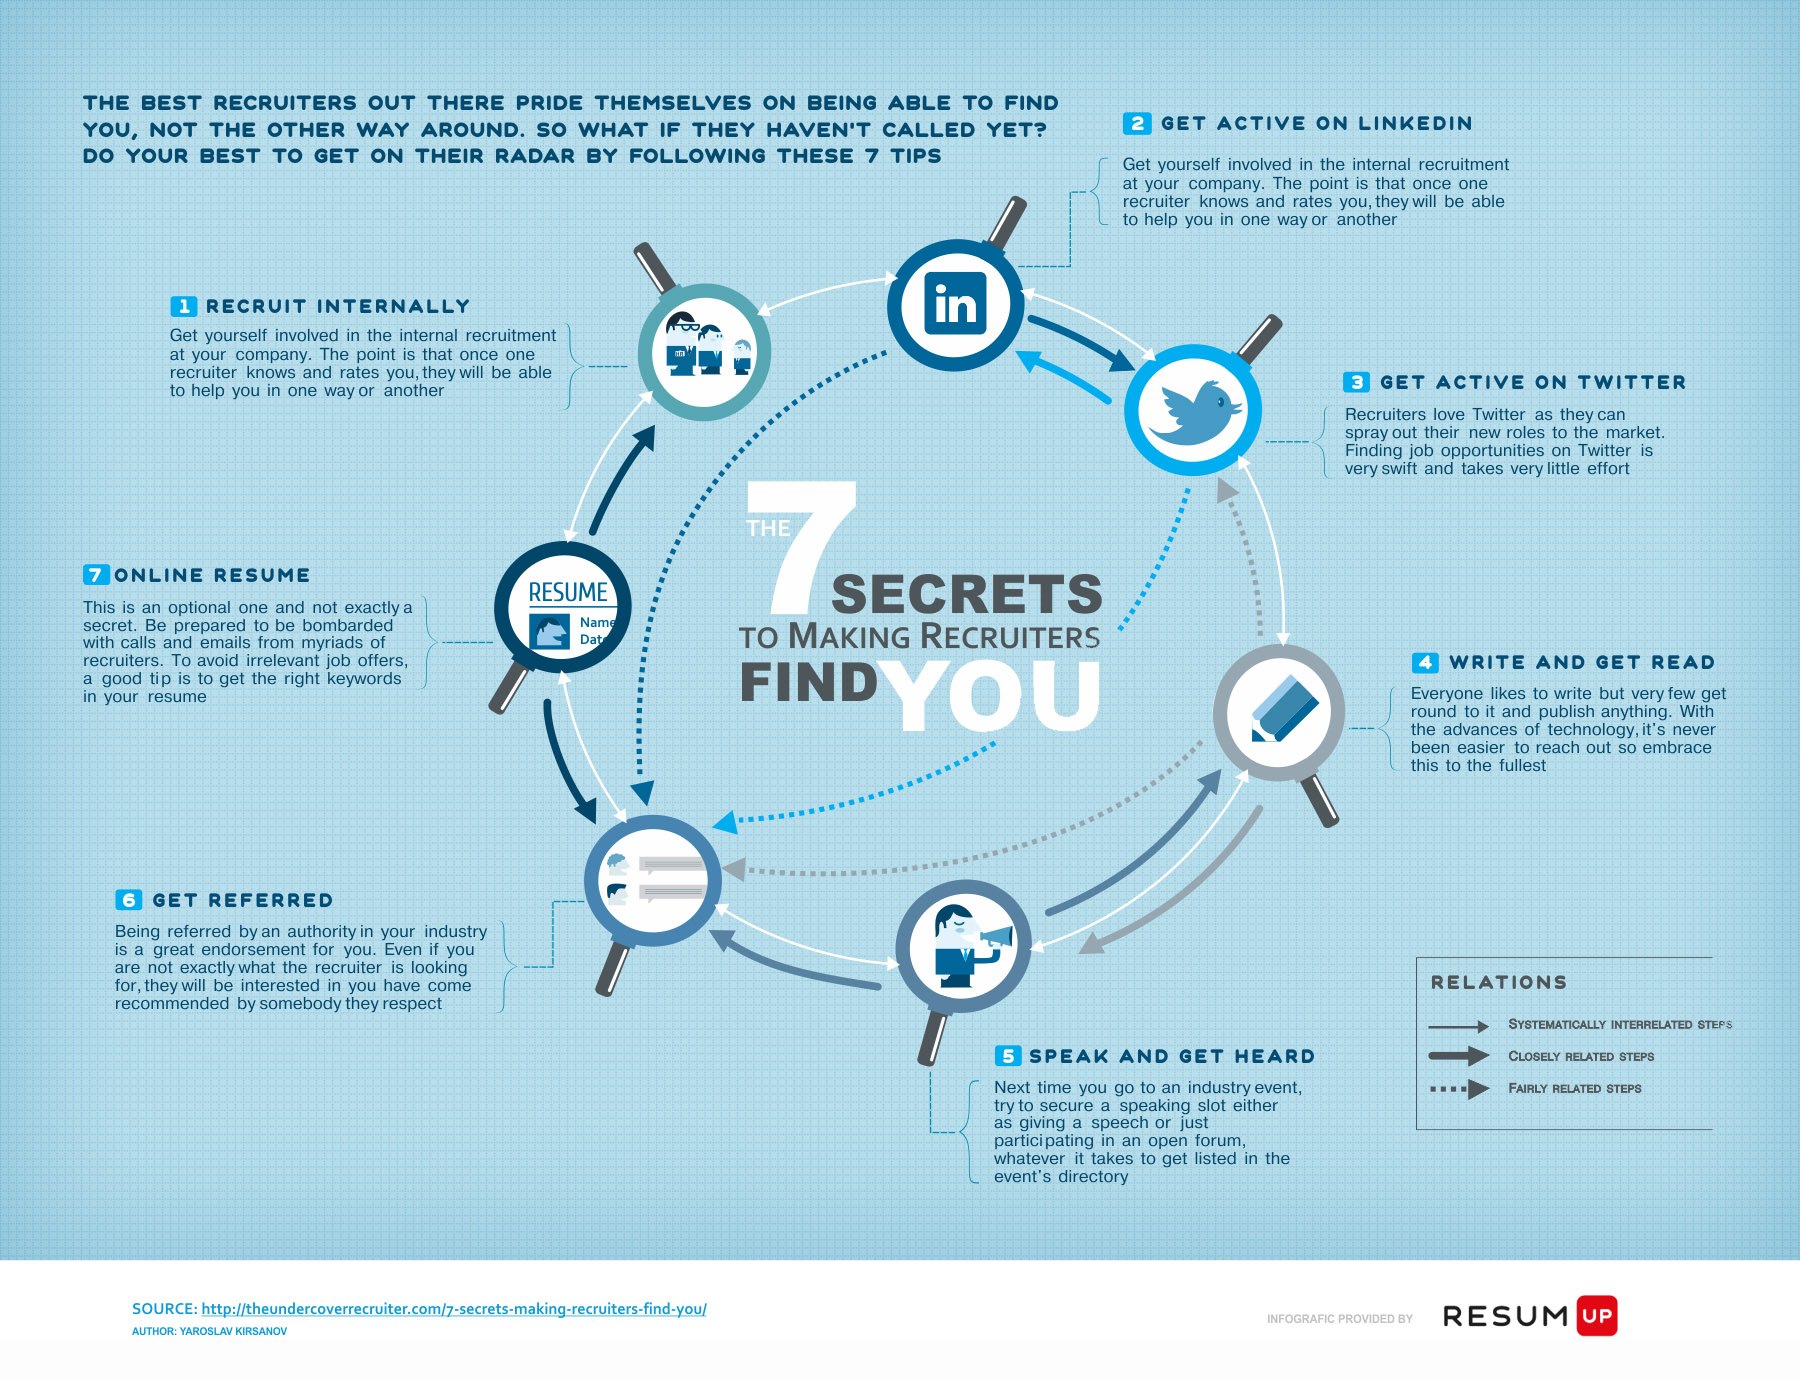 7 Secrets To Making Recruiters Find You [Infographic]